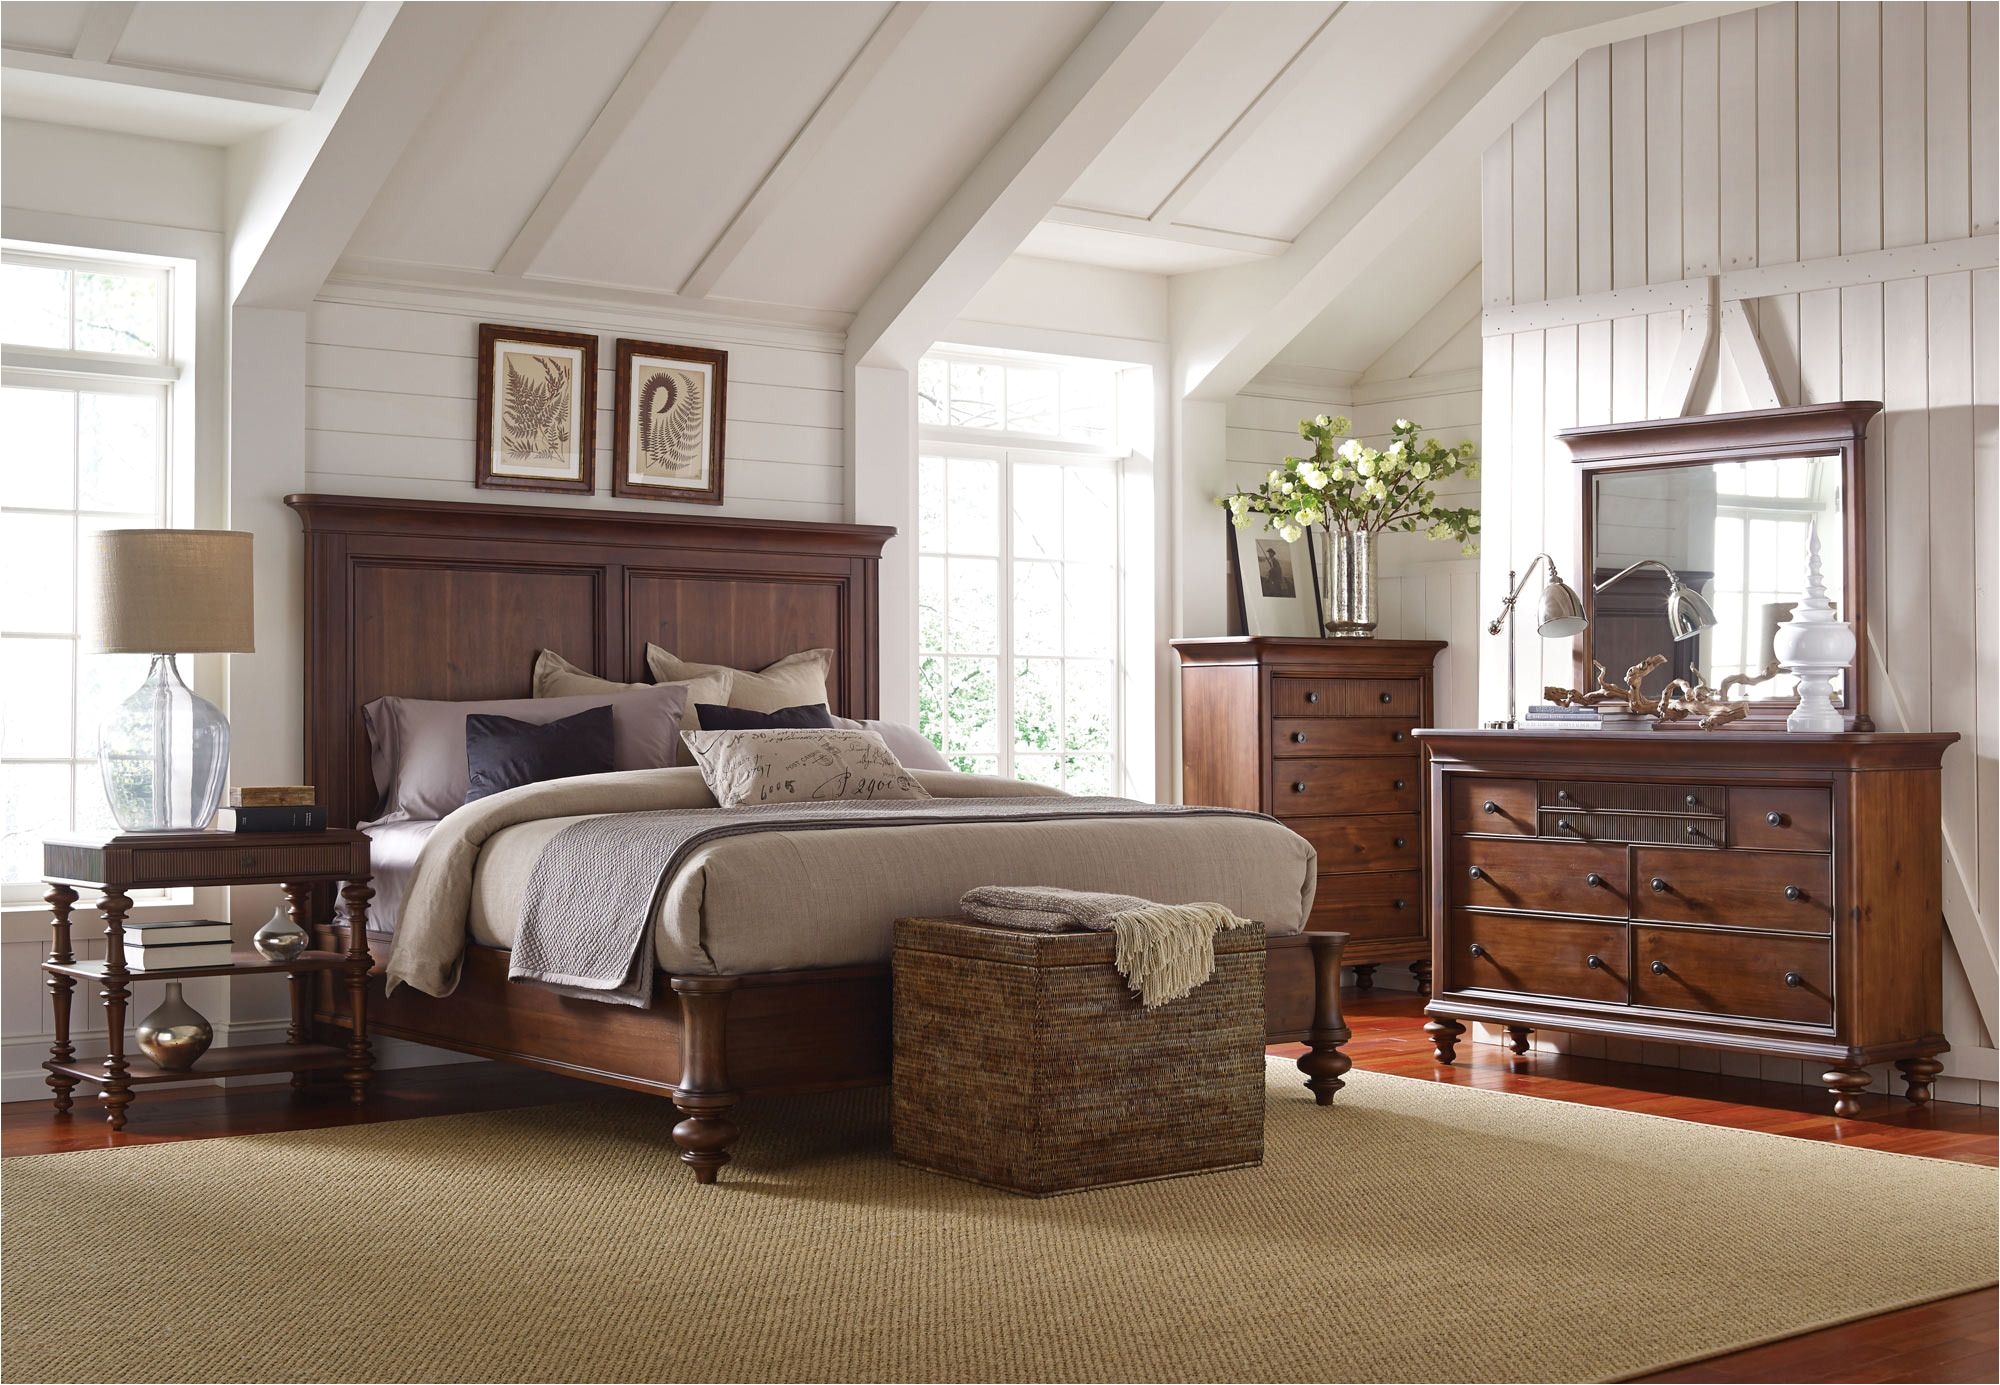 glamorous haverty bedroom sets in furniture havertys furniture havertys furniture 0d furnitures